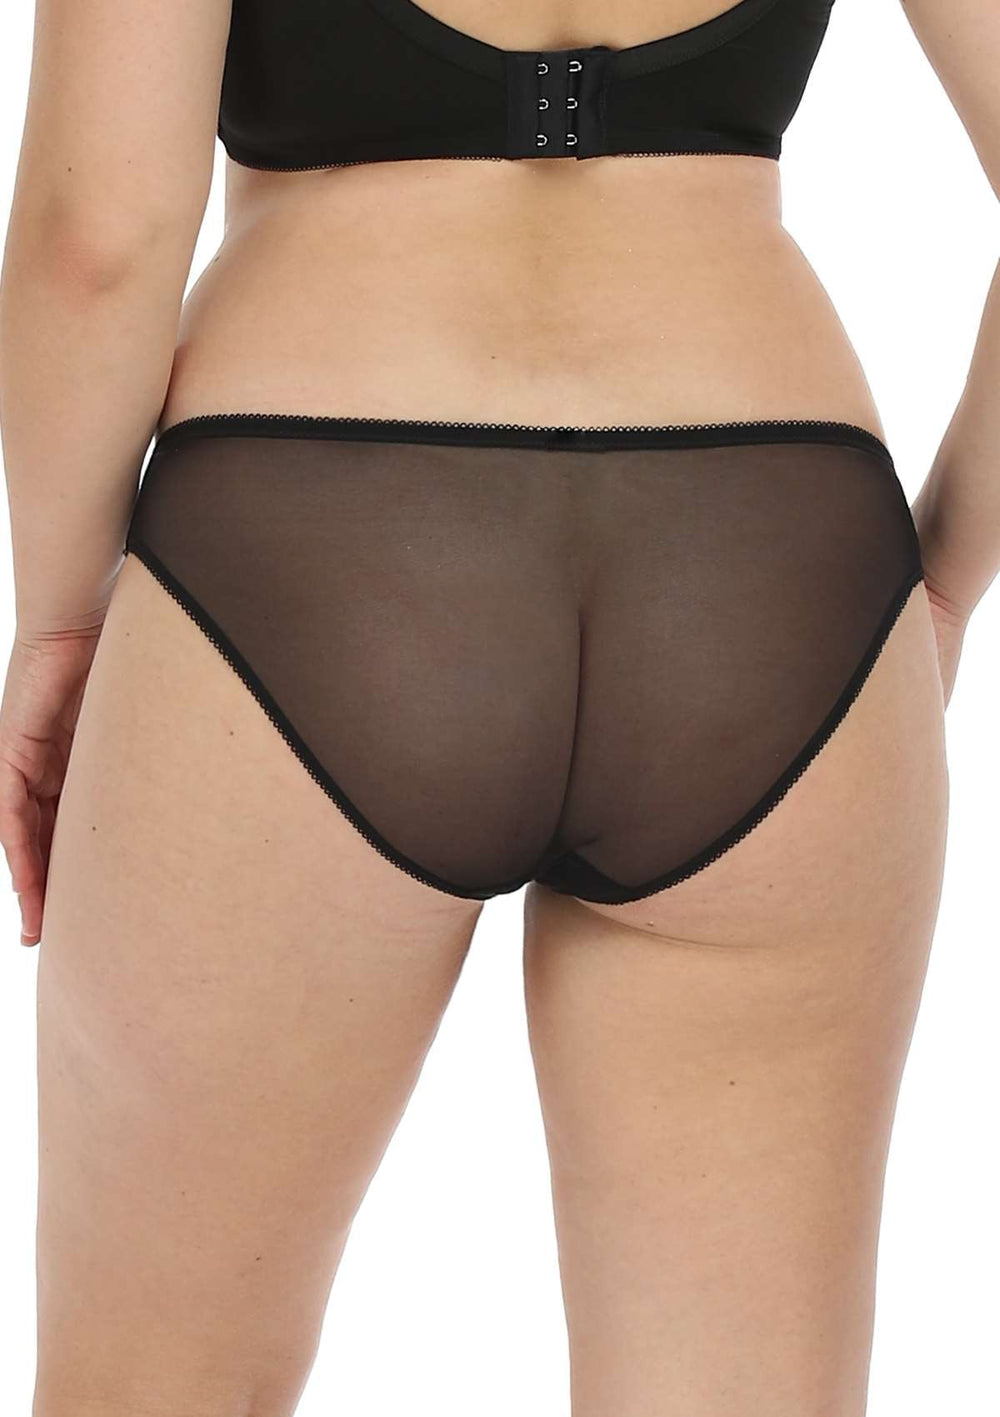 HSIA Anemone Lace Mesh Dolphin-Patterned Mid-low Rise Underwear